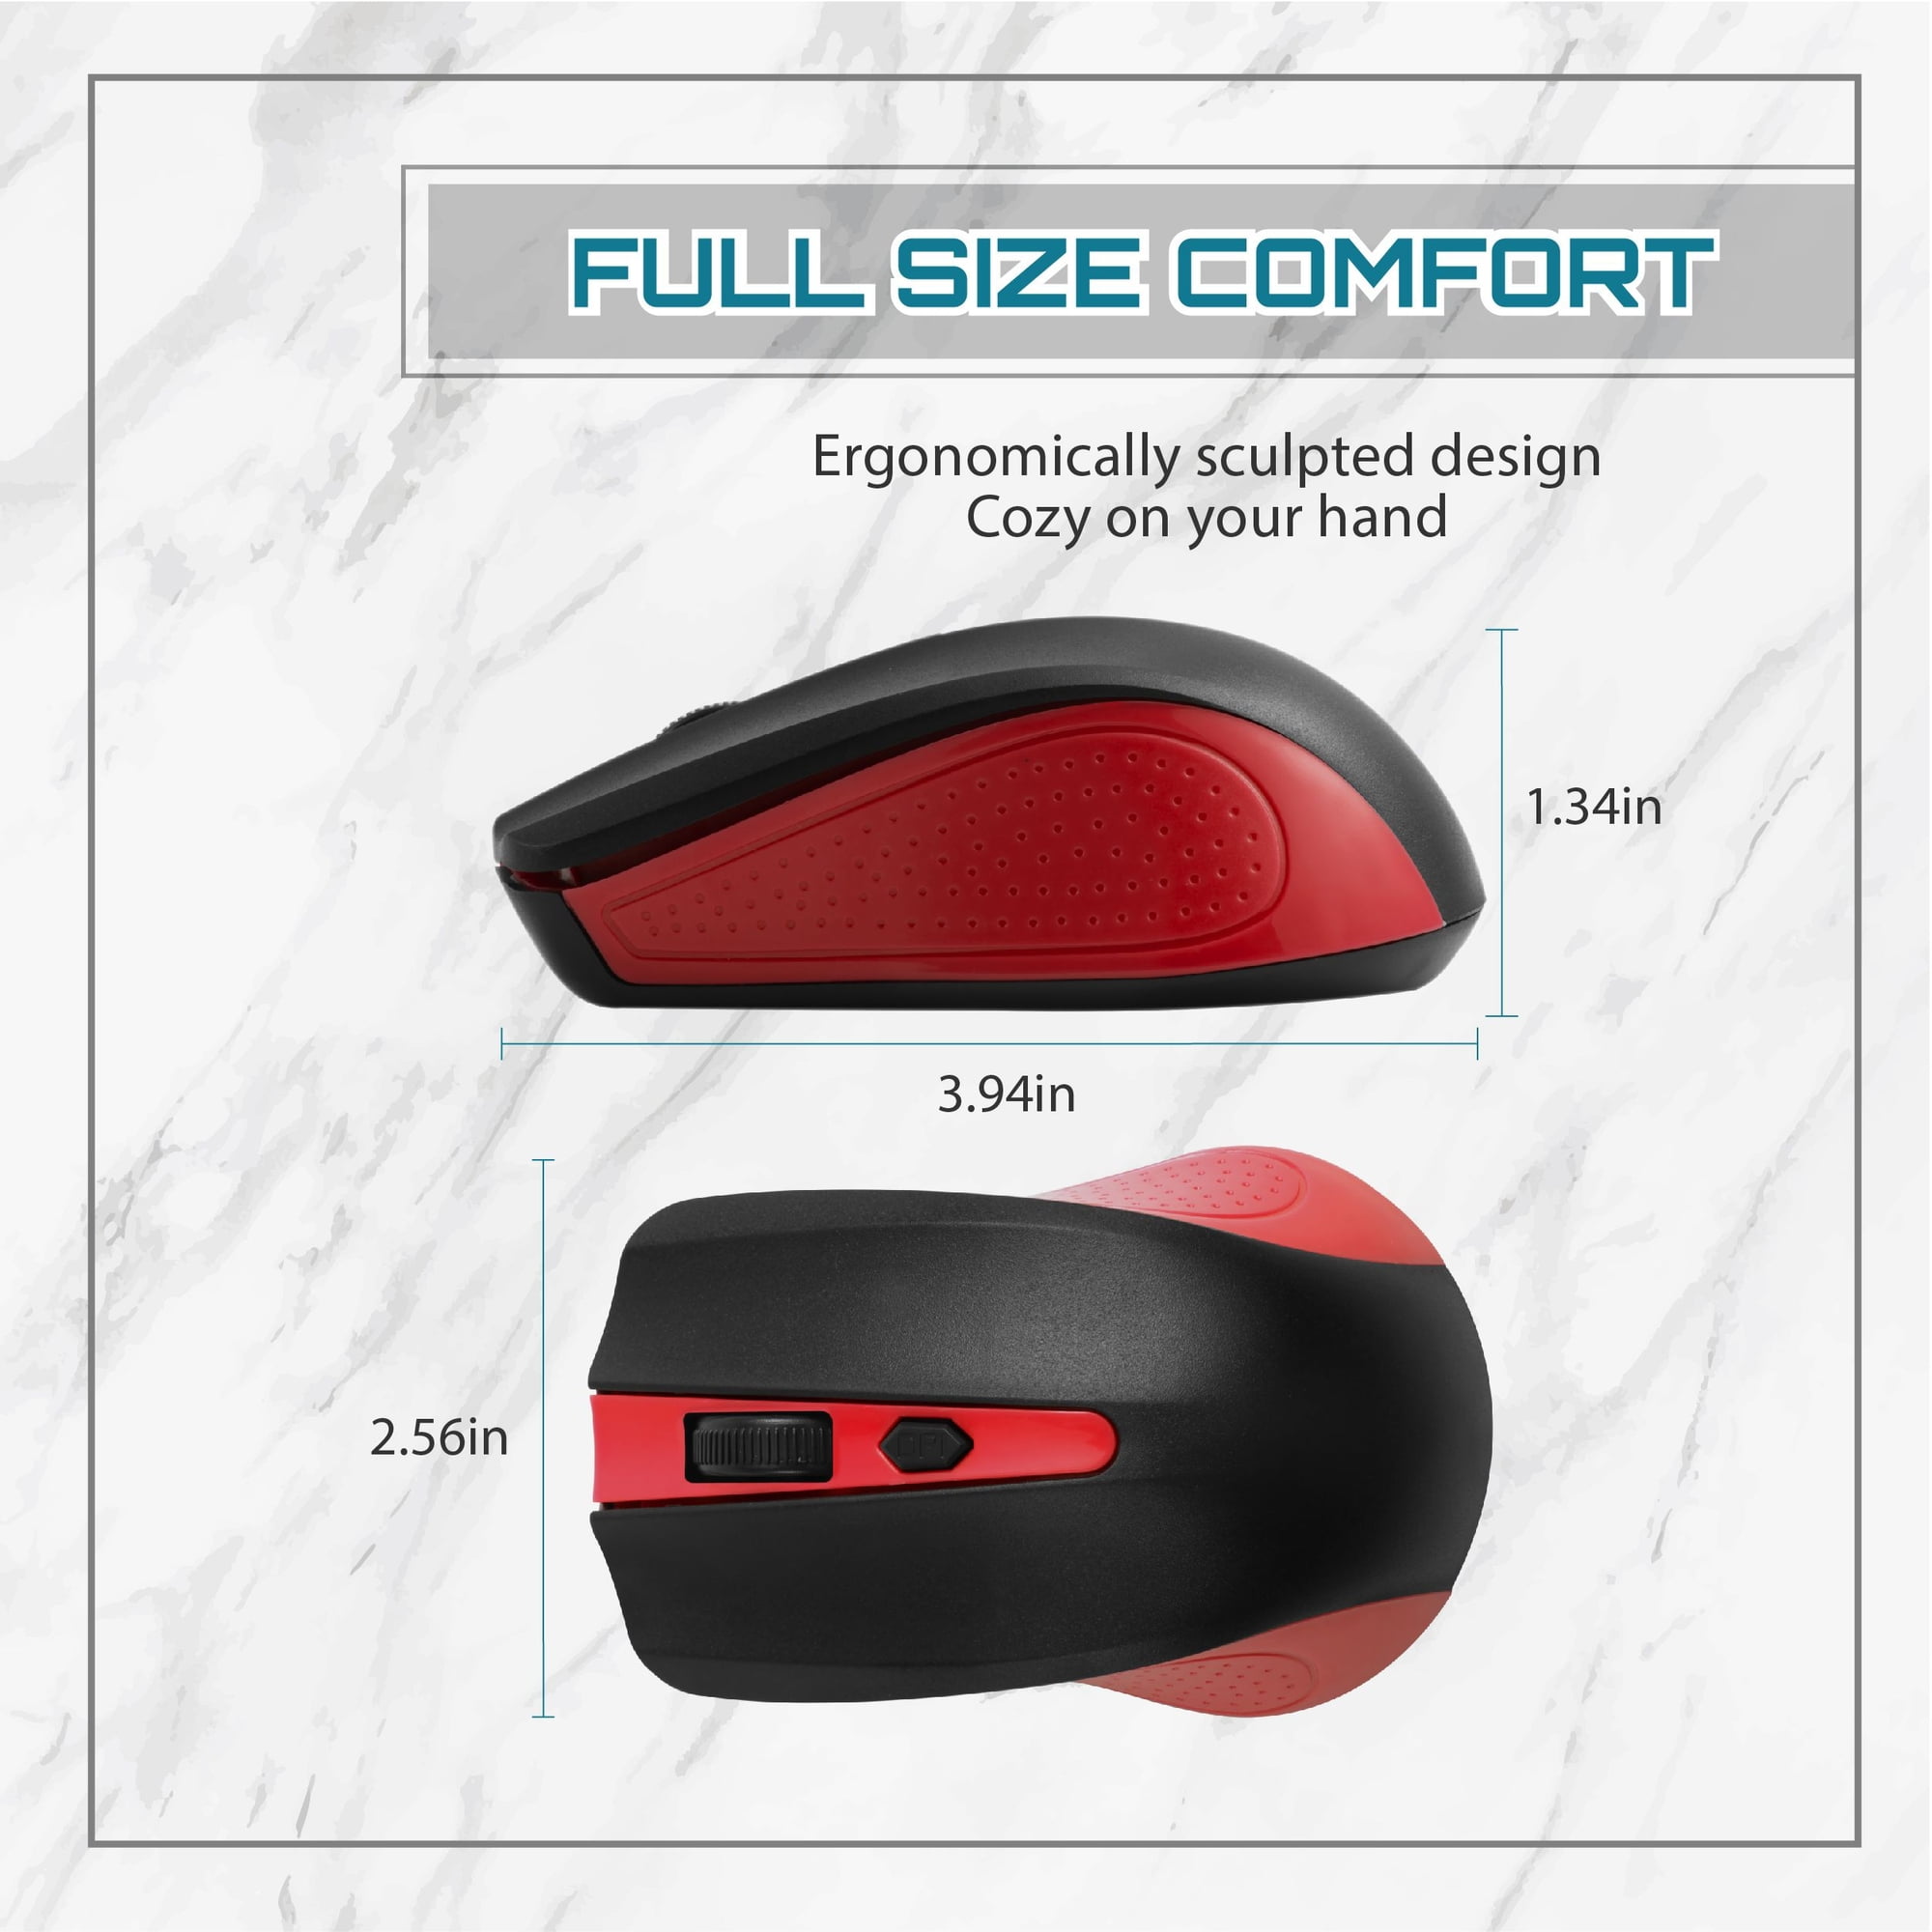 Basics 2.4 Ghz Wireless Optical Computer Mouse with USB Nano  Receiver, Red